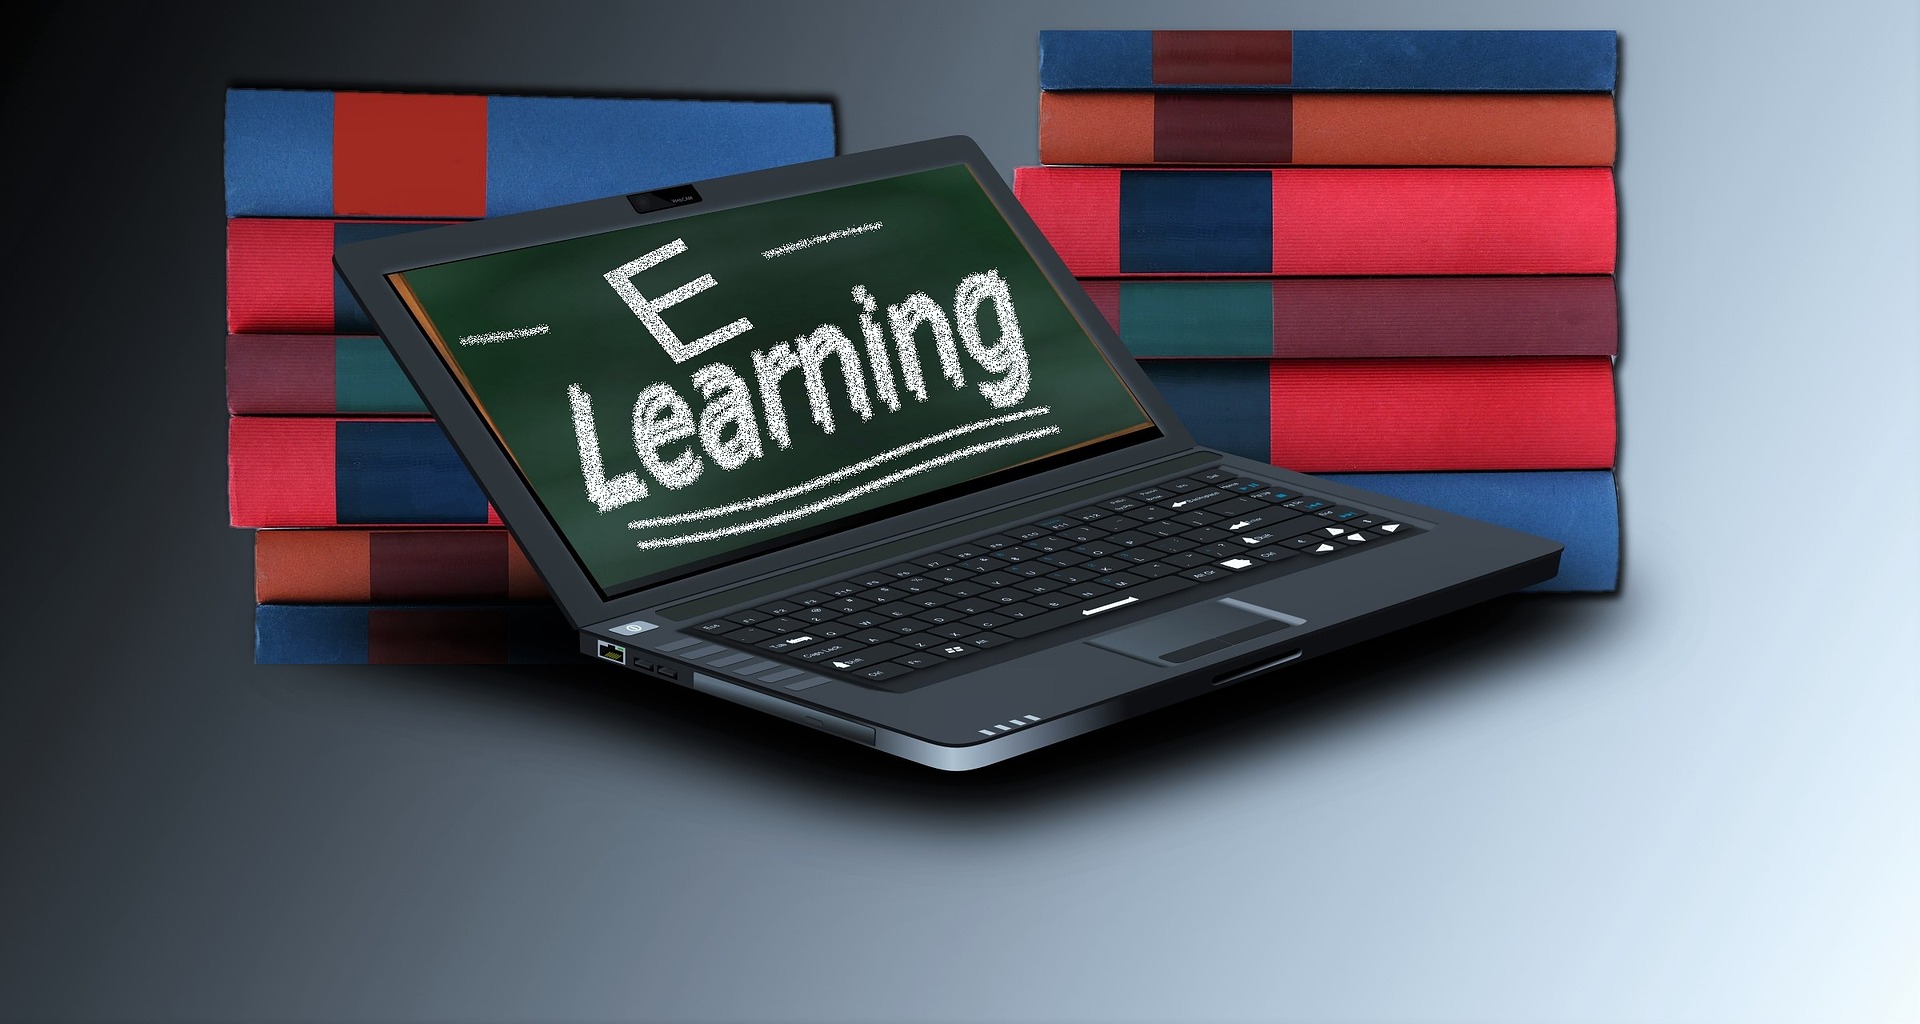 Laptop with the words "e-learning" on screen set against a backdrop of books